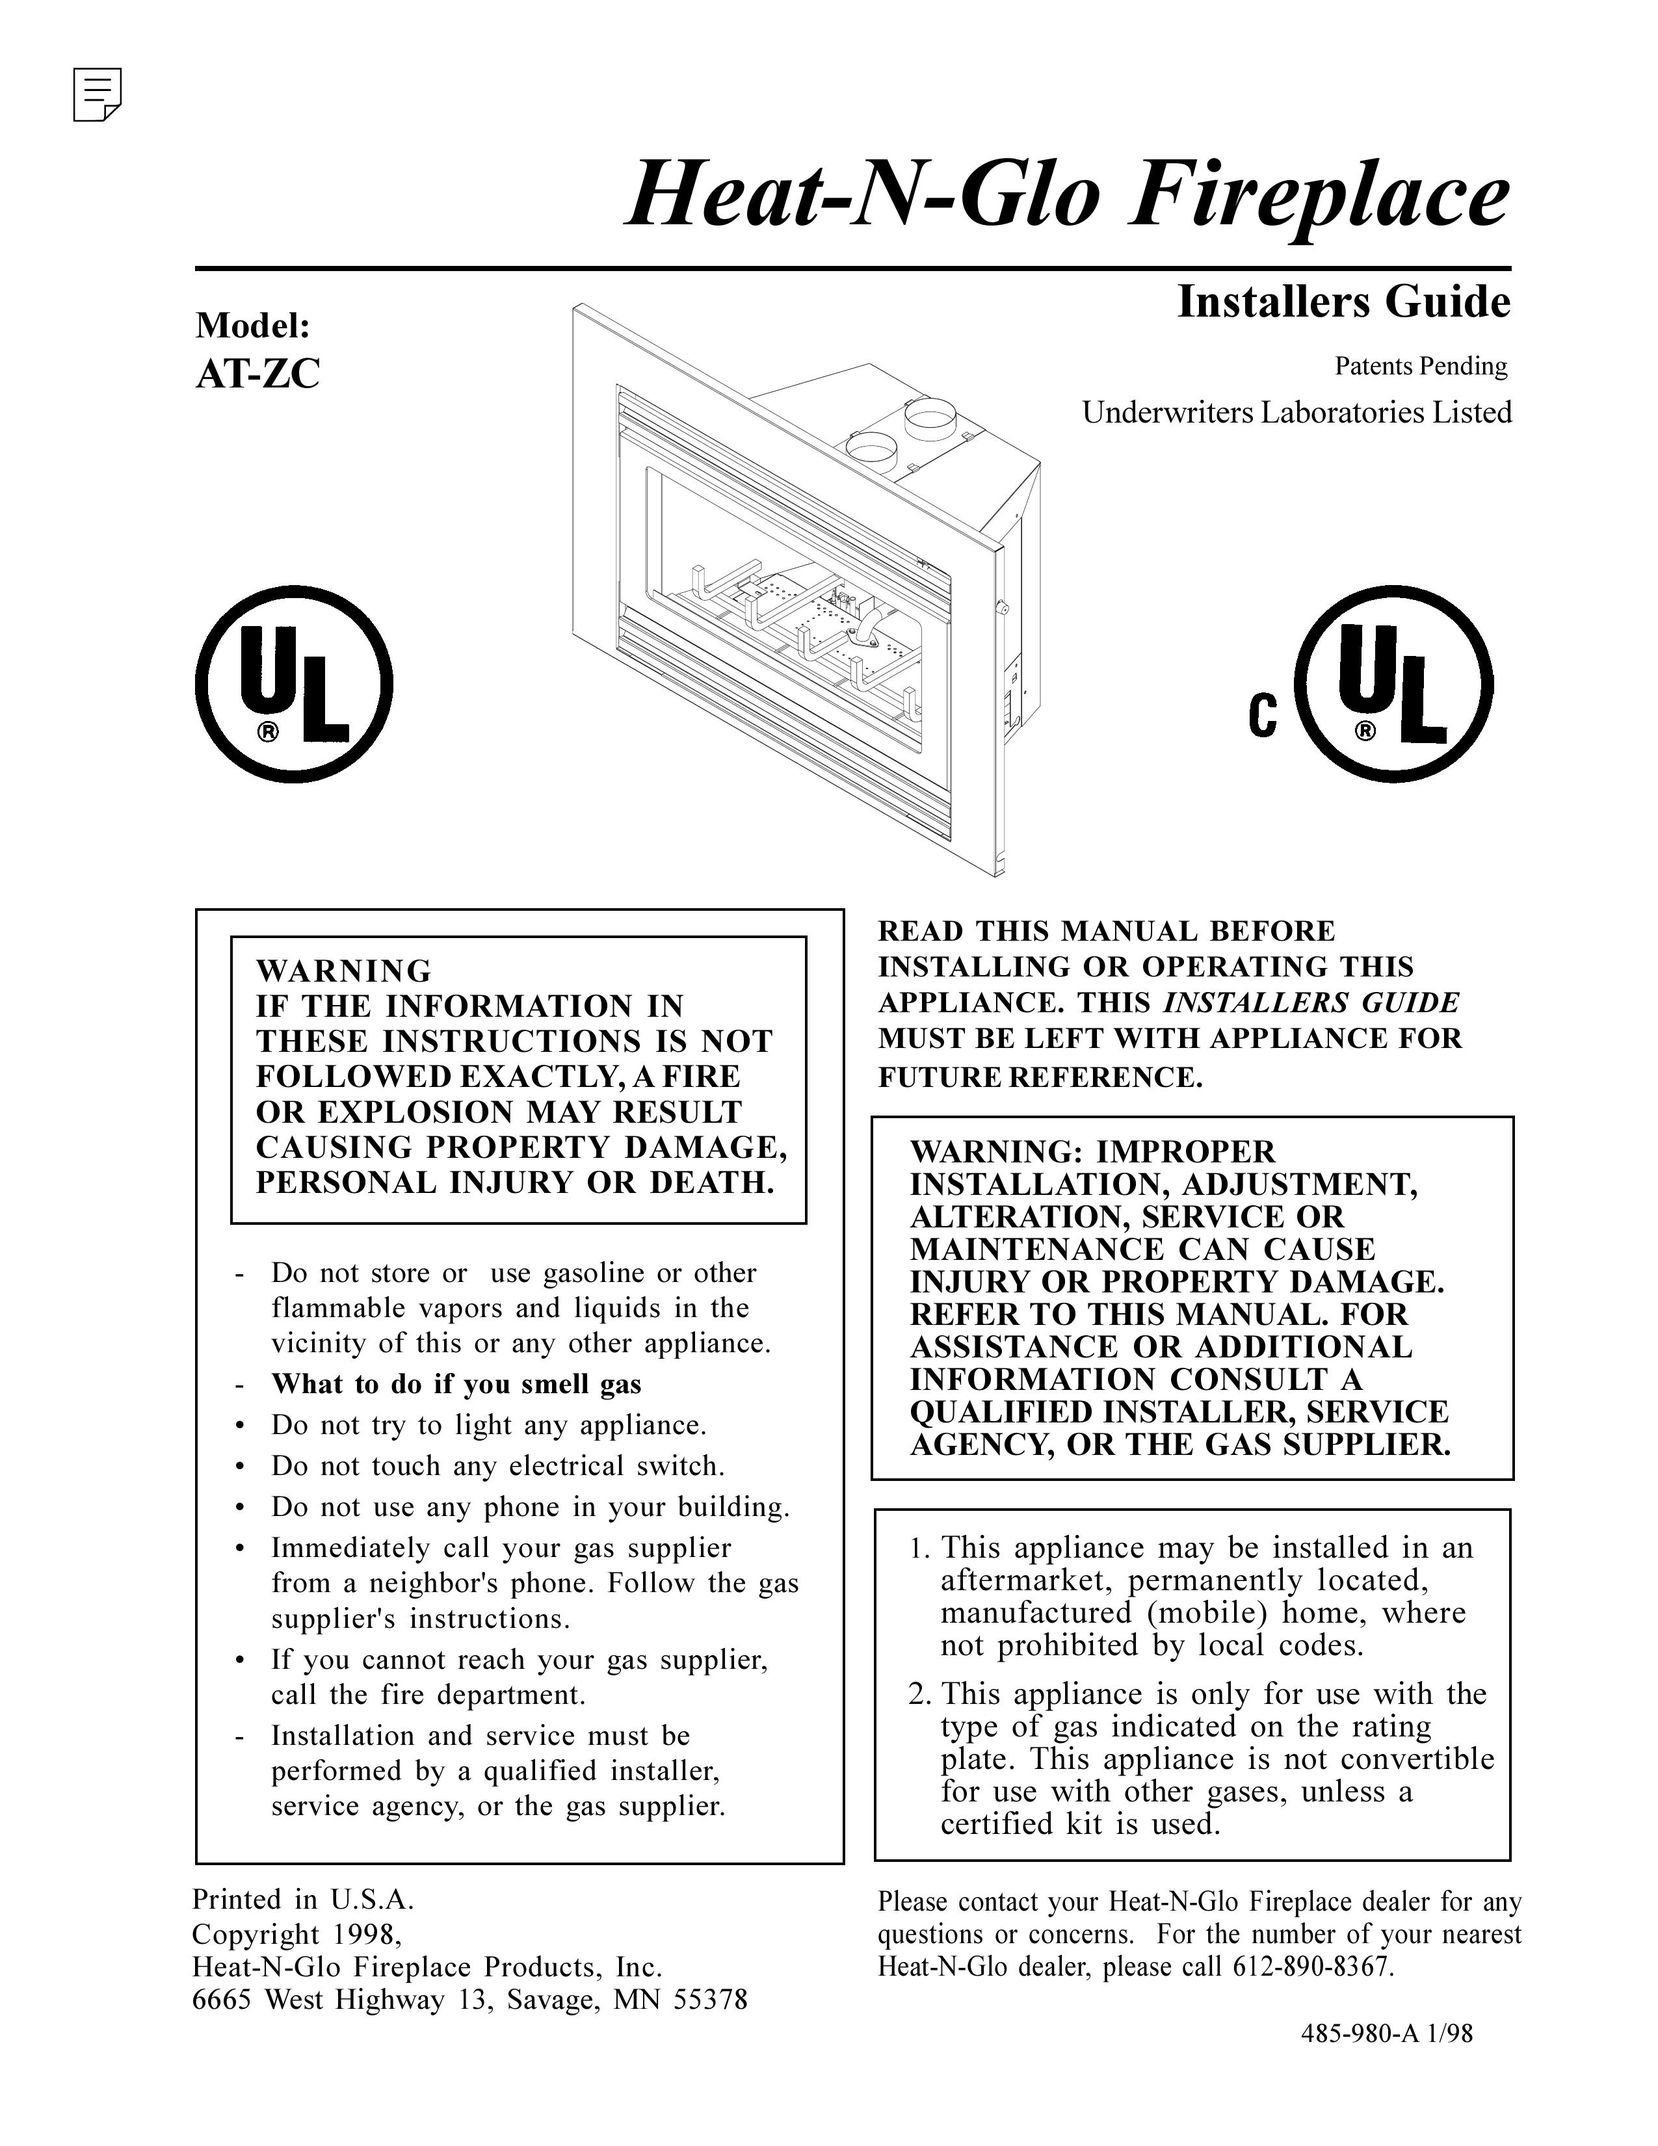 Heat & Glo LifeStyle AT-ZC Indoor Fireplace User Manual